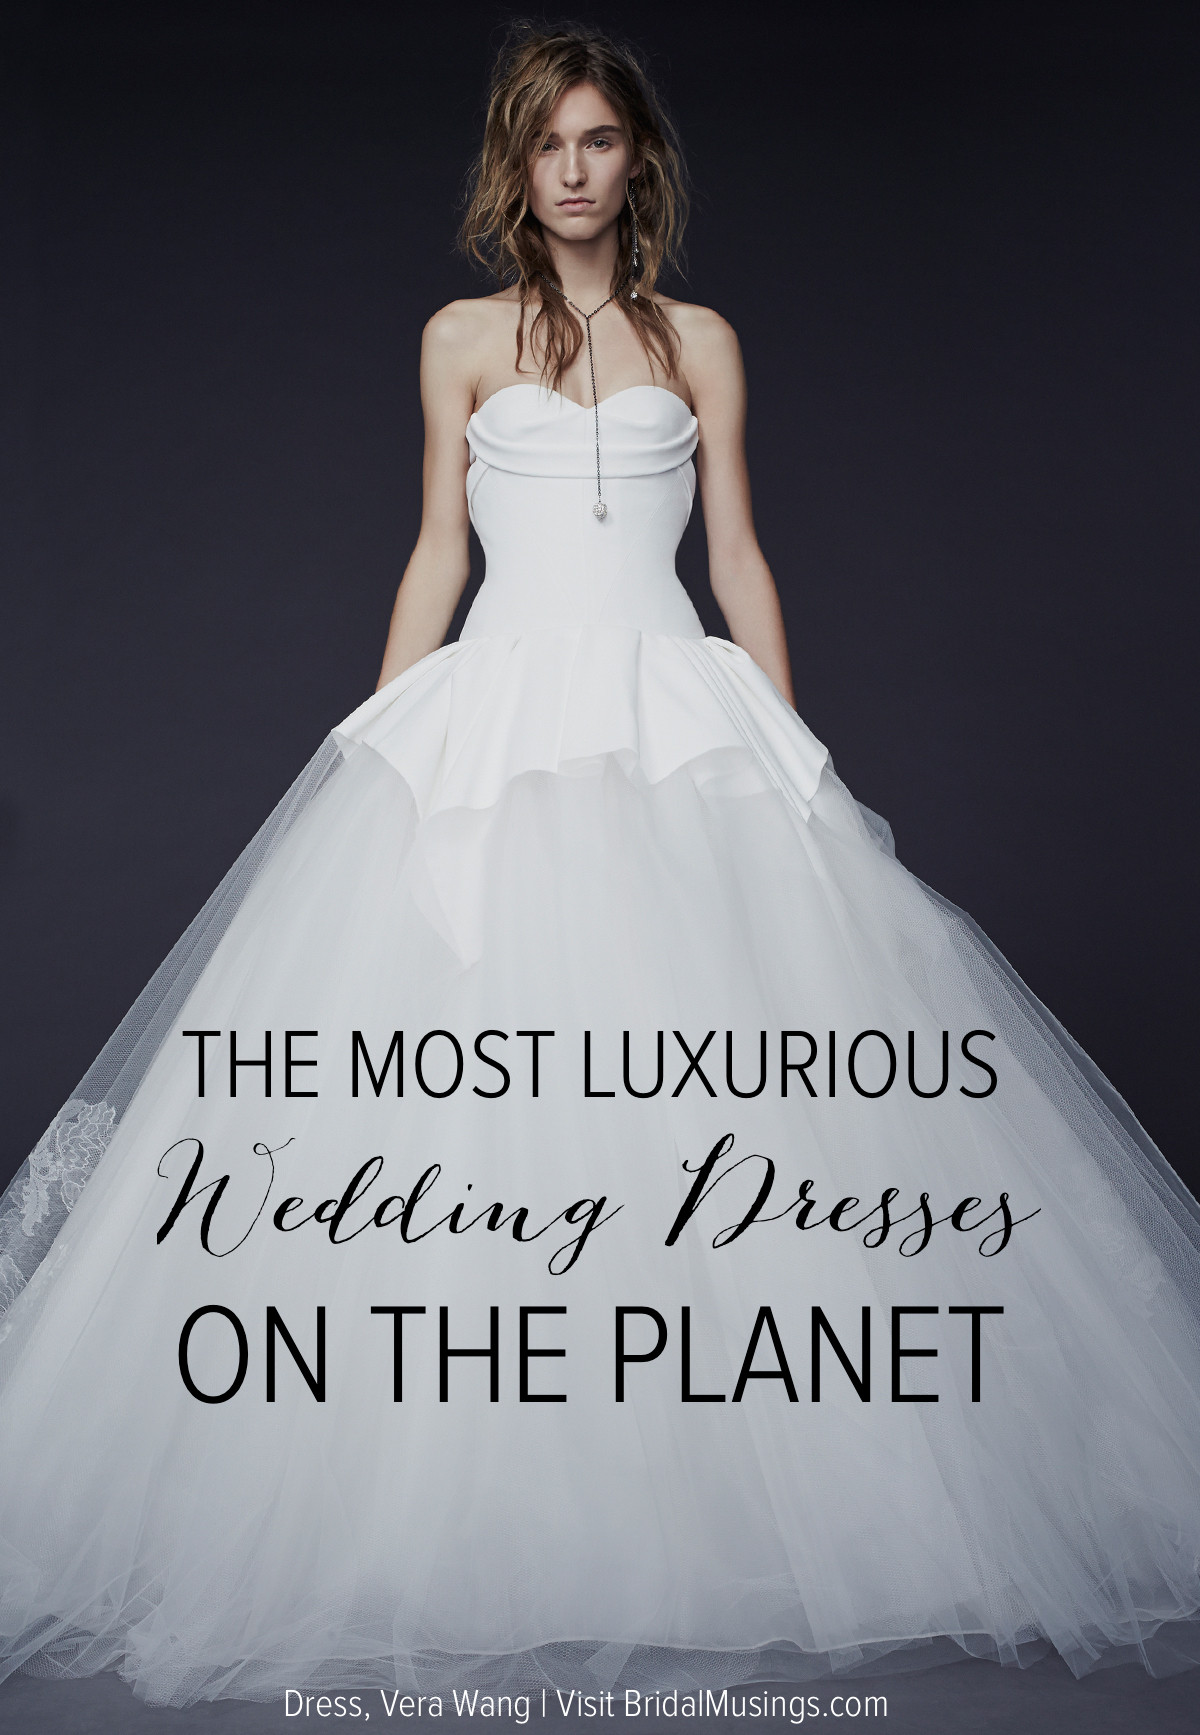 Vera Wang Wedding Dress Price
 How Much Does a Wedding Dress Cost The Couture Edition